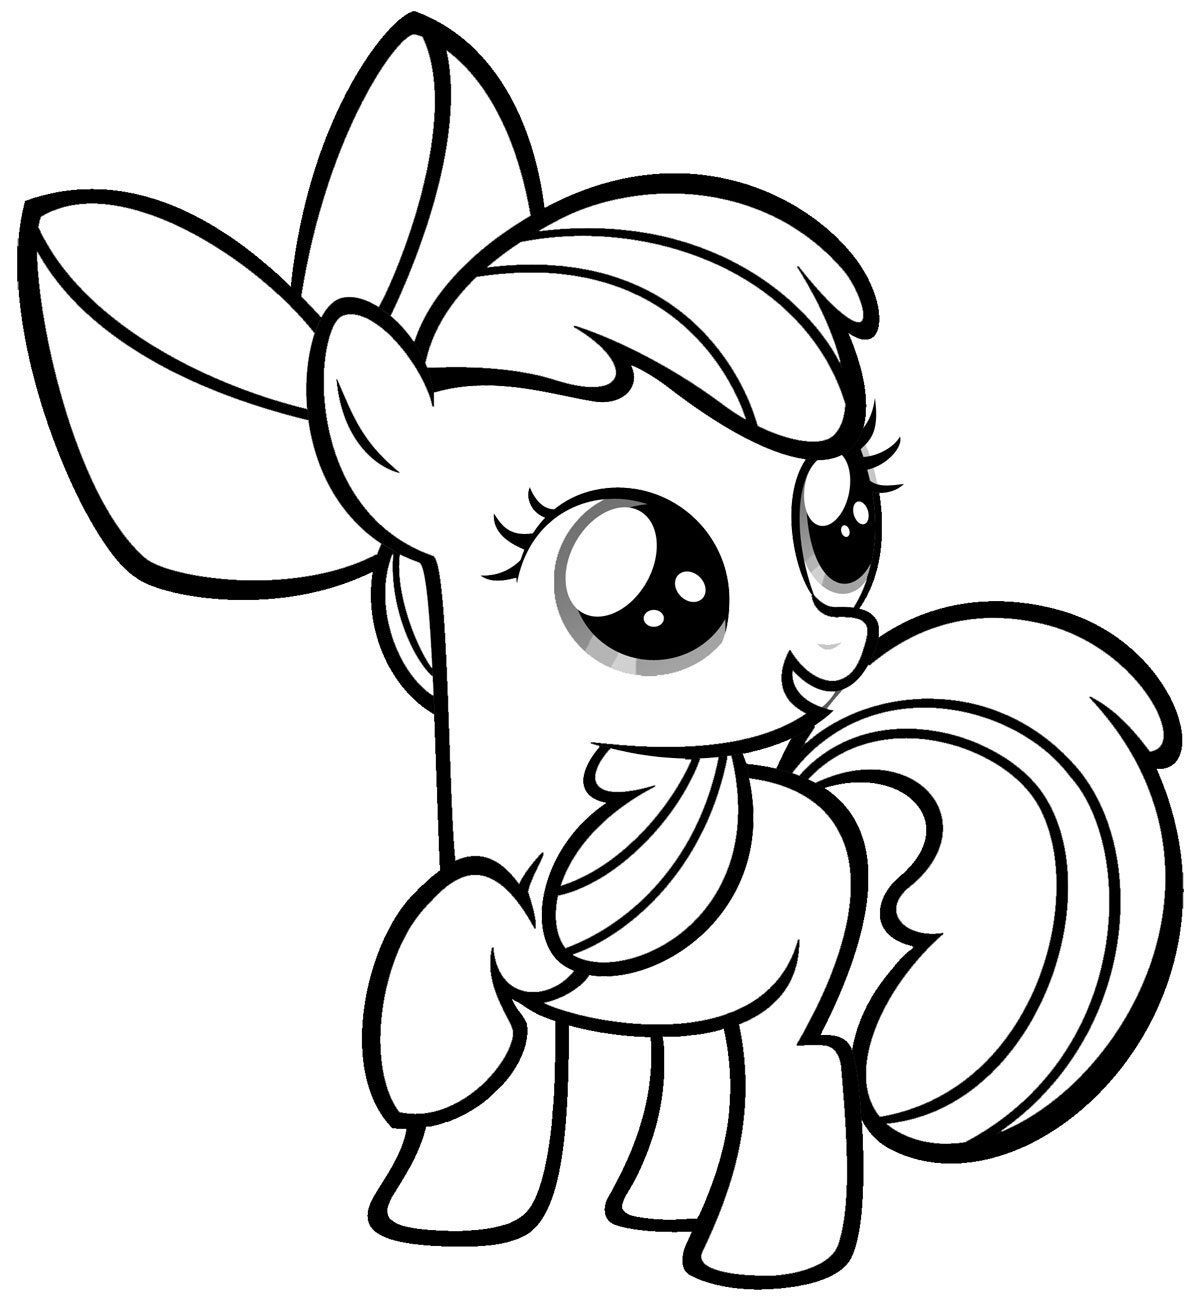 Coloring Pages For Girls Easy
 coloring pages for girls 02 ponies Pinterest